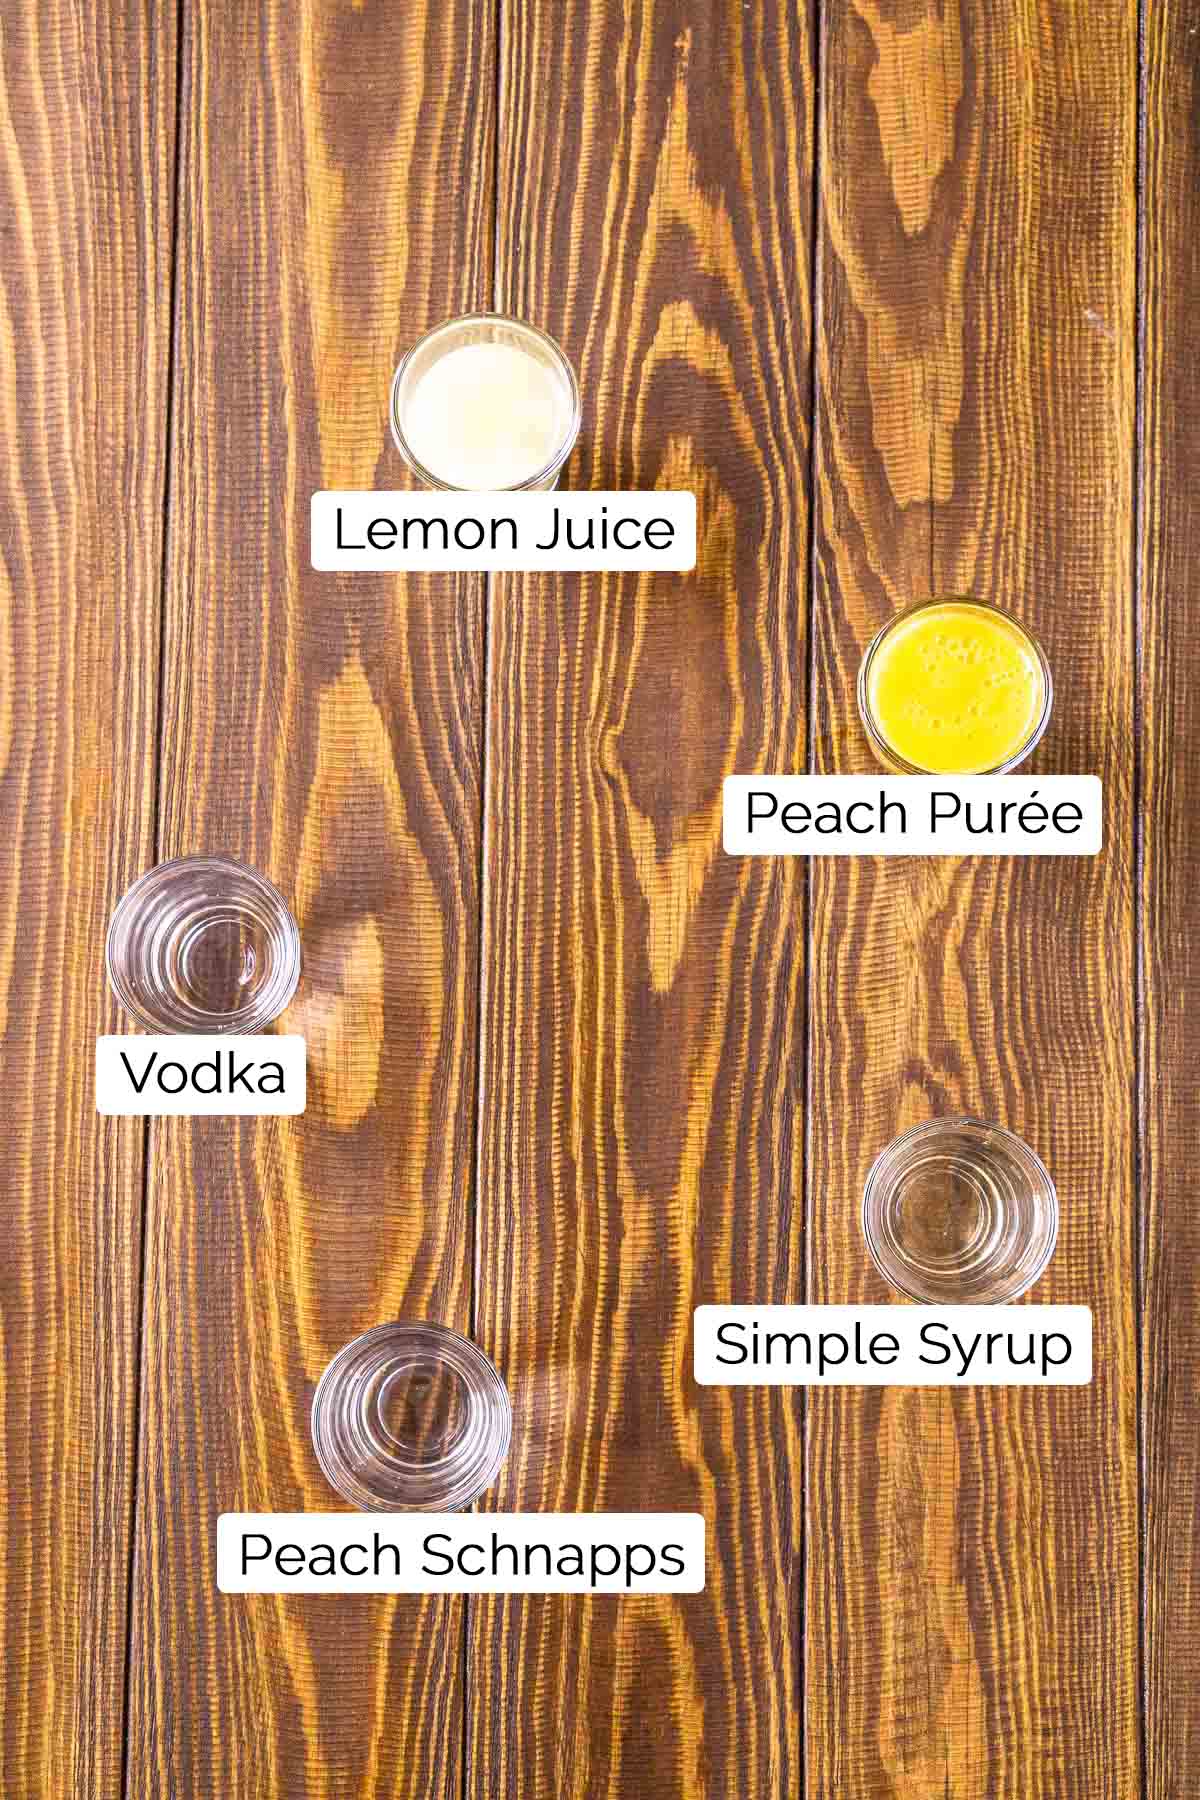 The drink ingredients in shot glasses on a brown wooden surface with black and white labels.